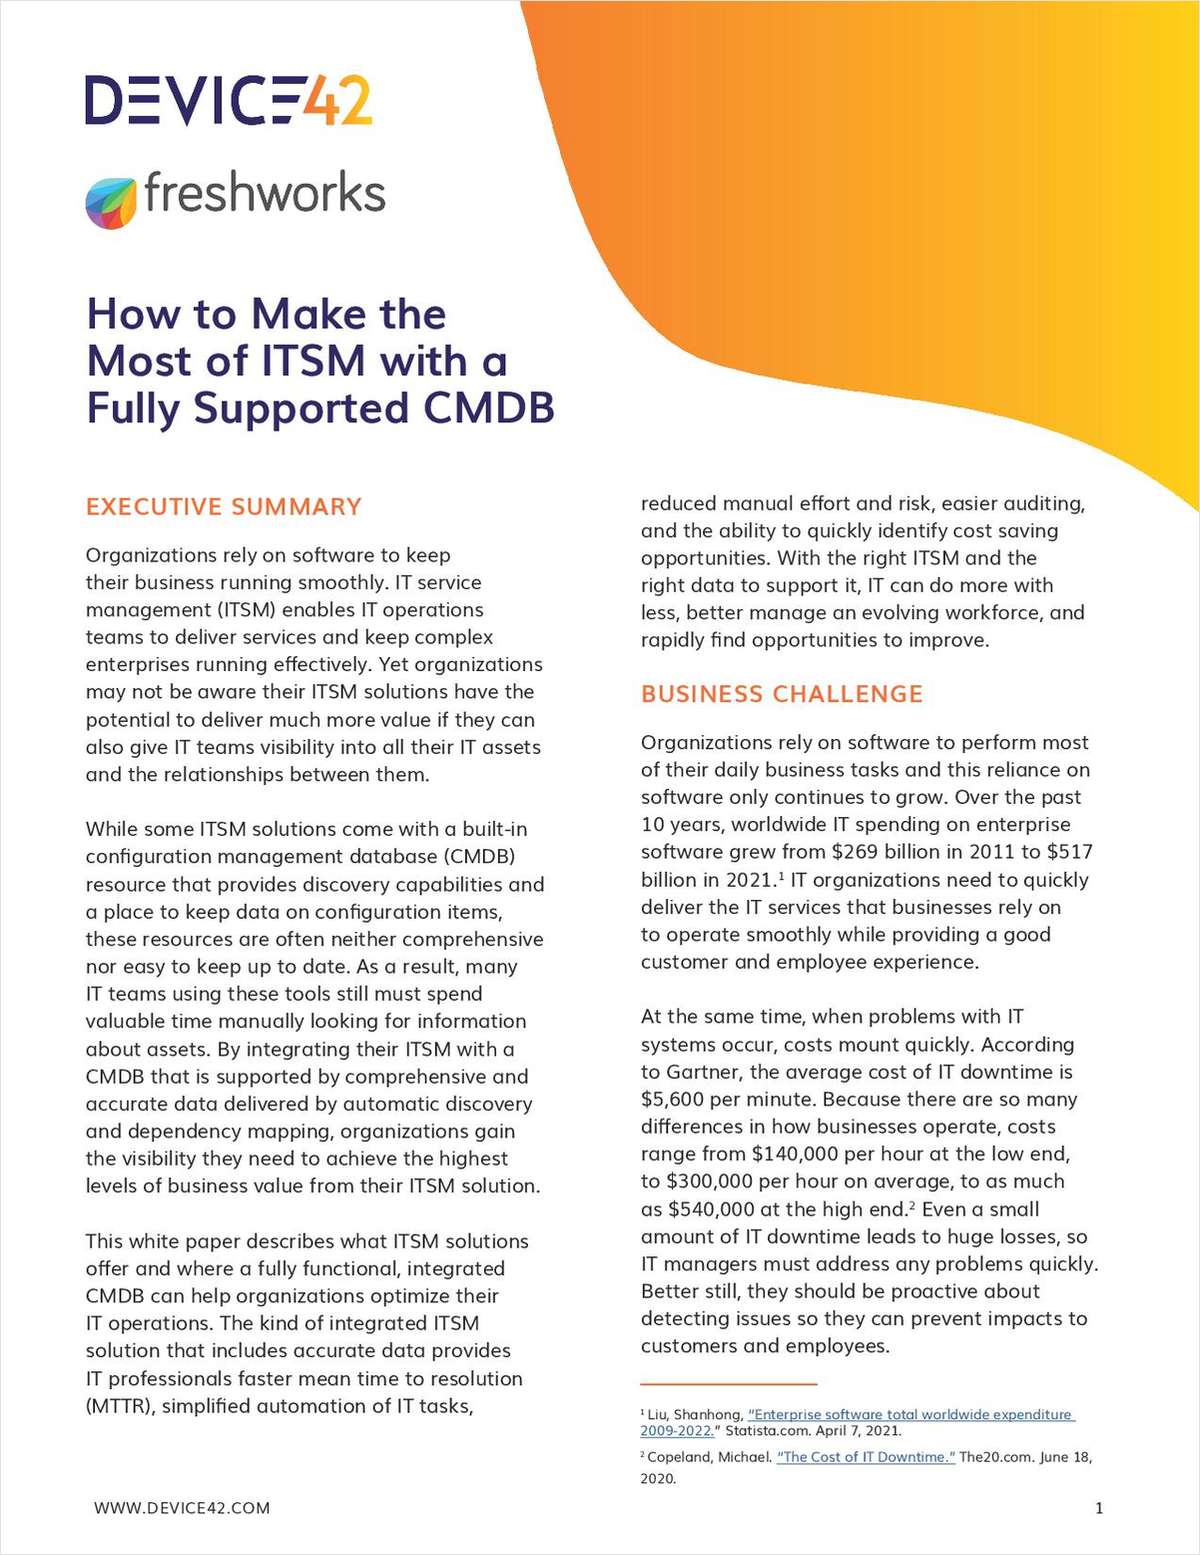 Device42 and Freshservice: Make the Most of ITSM with a Fully Supported CMDB